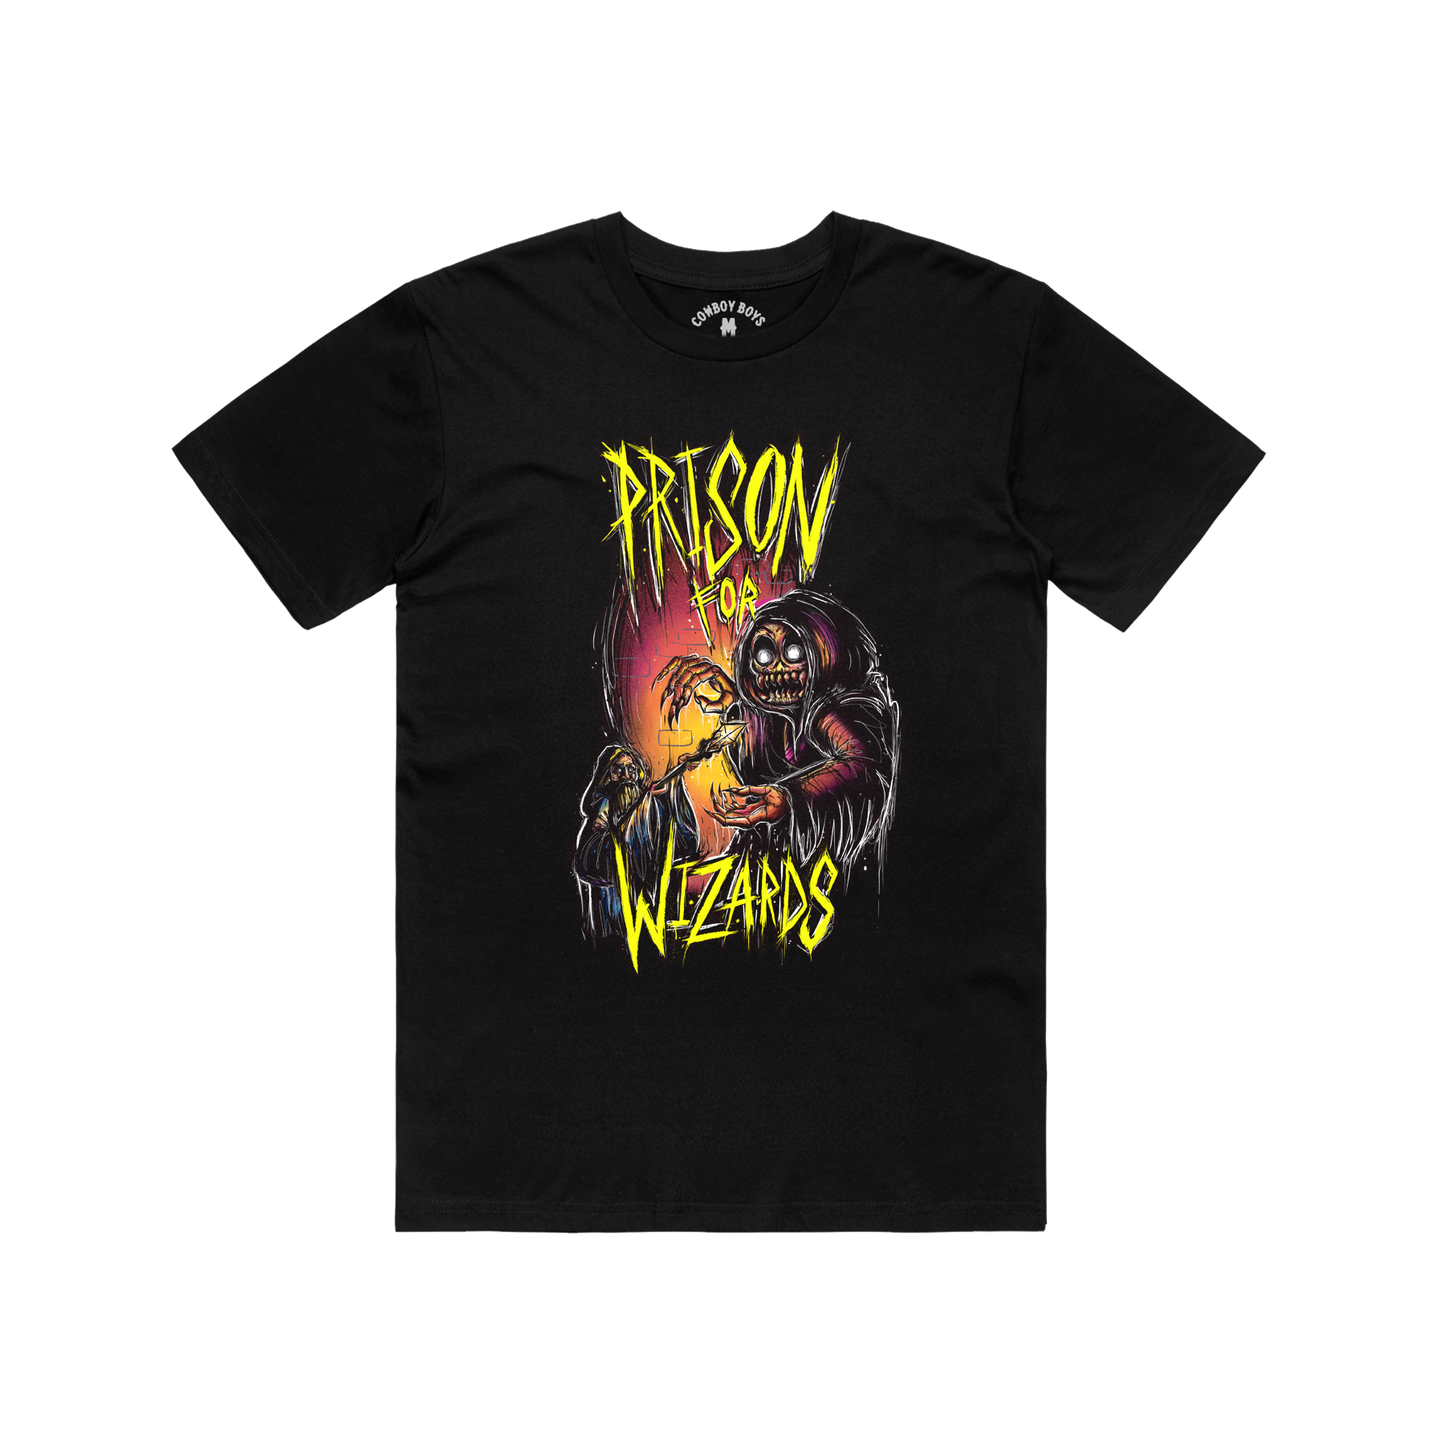 Prison for Wizards Tee